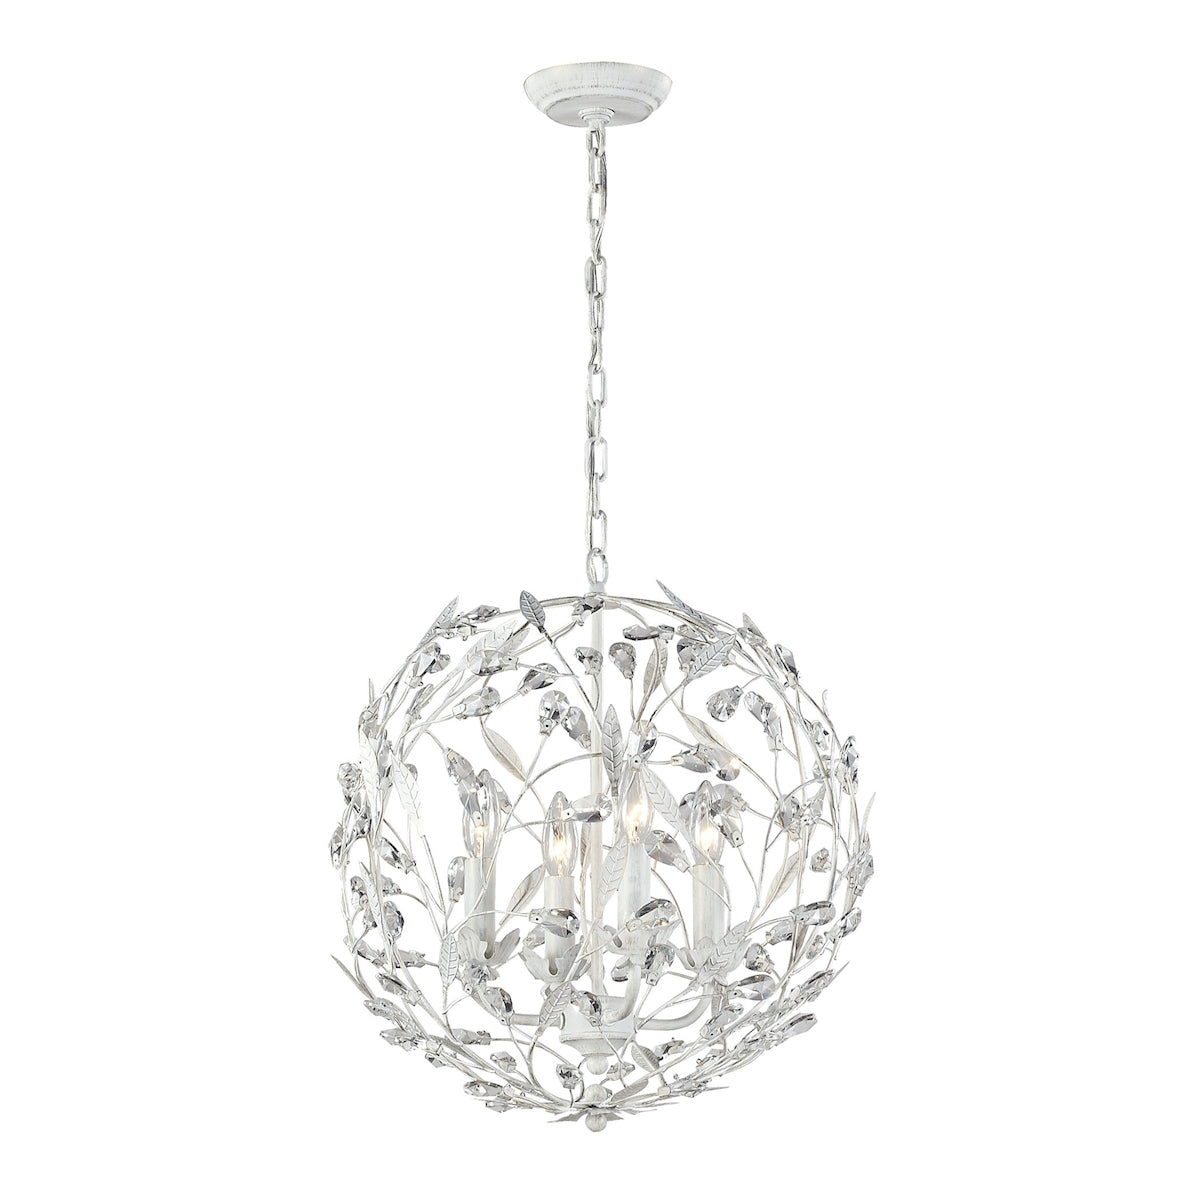 ELK Lighting 18124/4 Circeo 4-Light Chandelier in Antique White with Crystal